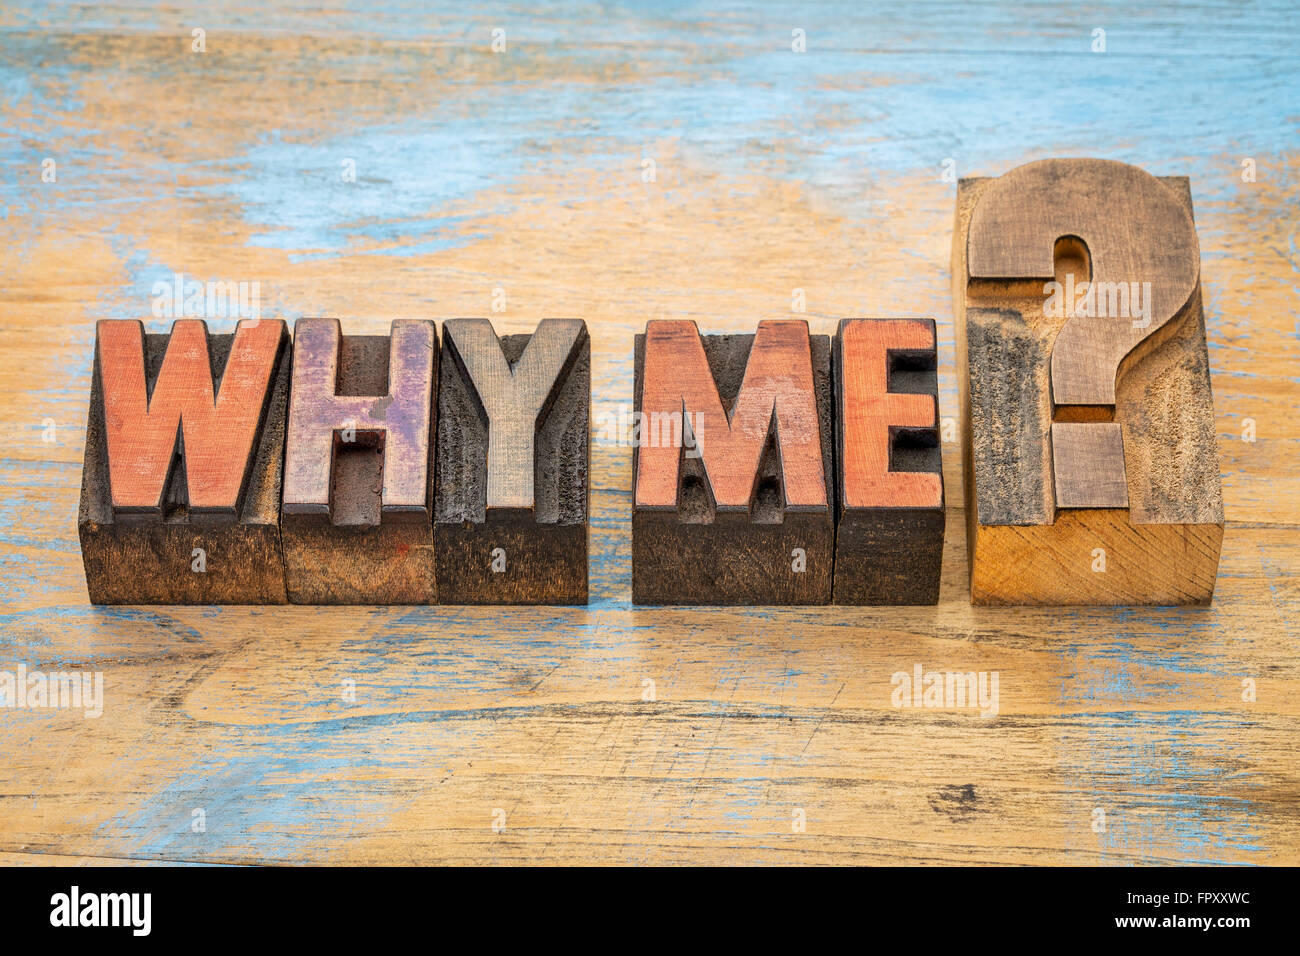 Why me question  - text in vintage letterpress wood type blocks stained by color inks Stock Photo